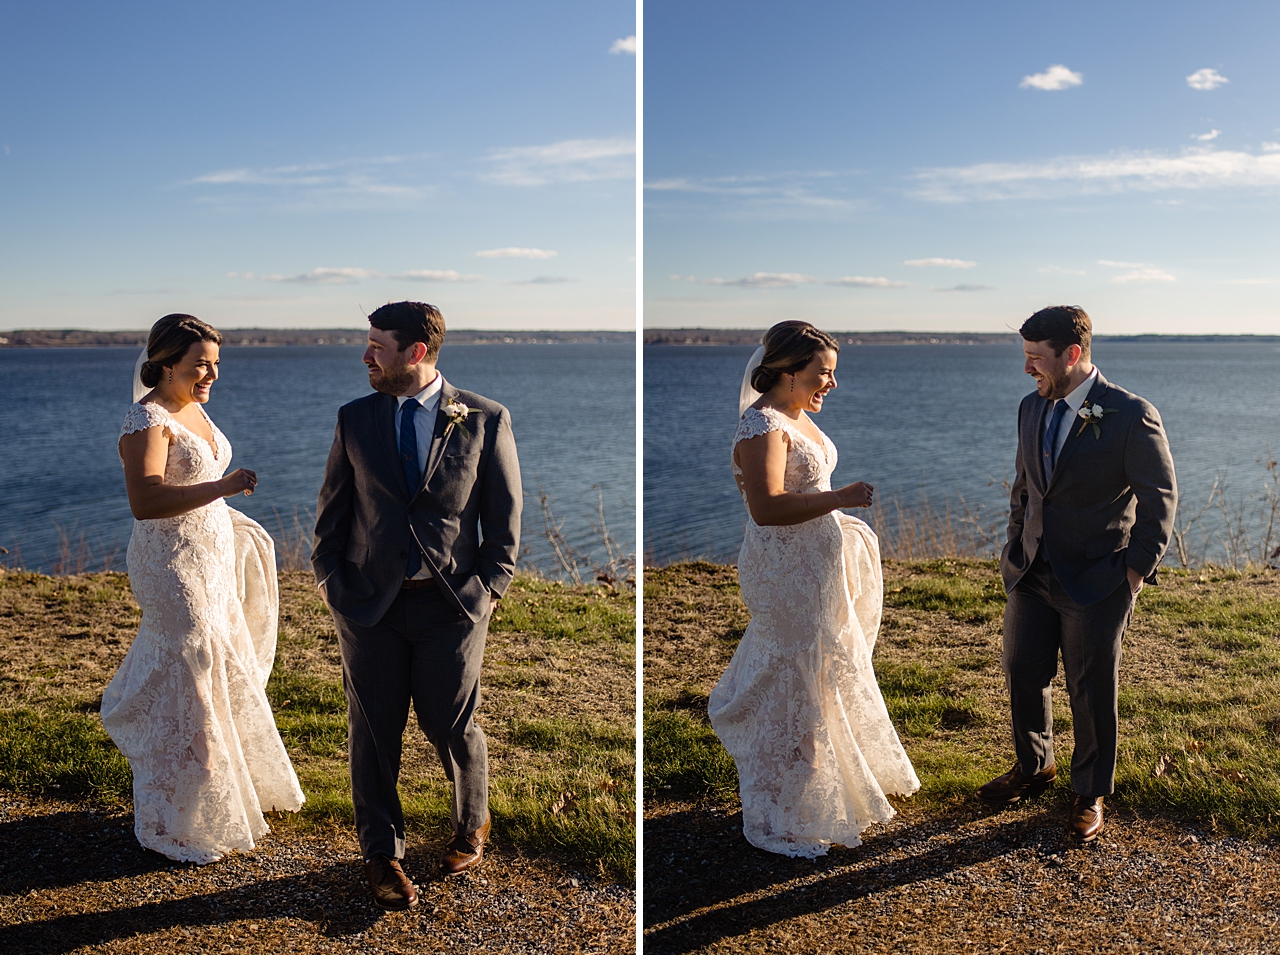 two images side by side of the moment the groom turns and sees his bride for the first time